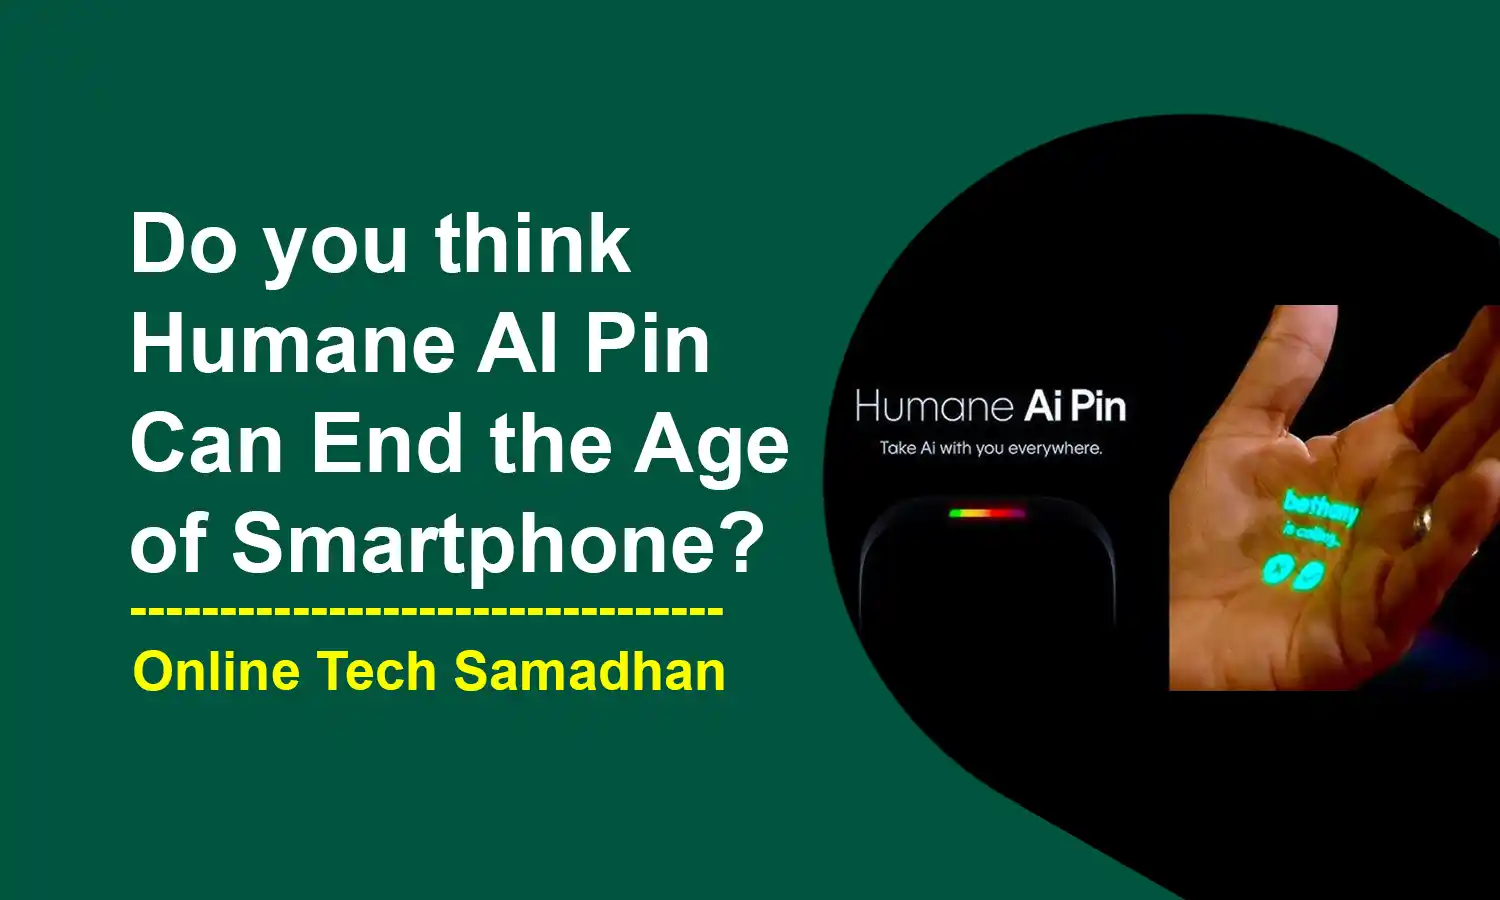 Humane AI Pin Can End the Age of Smartphones